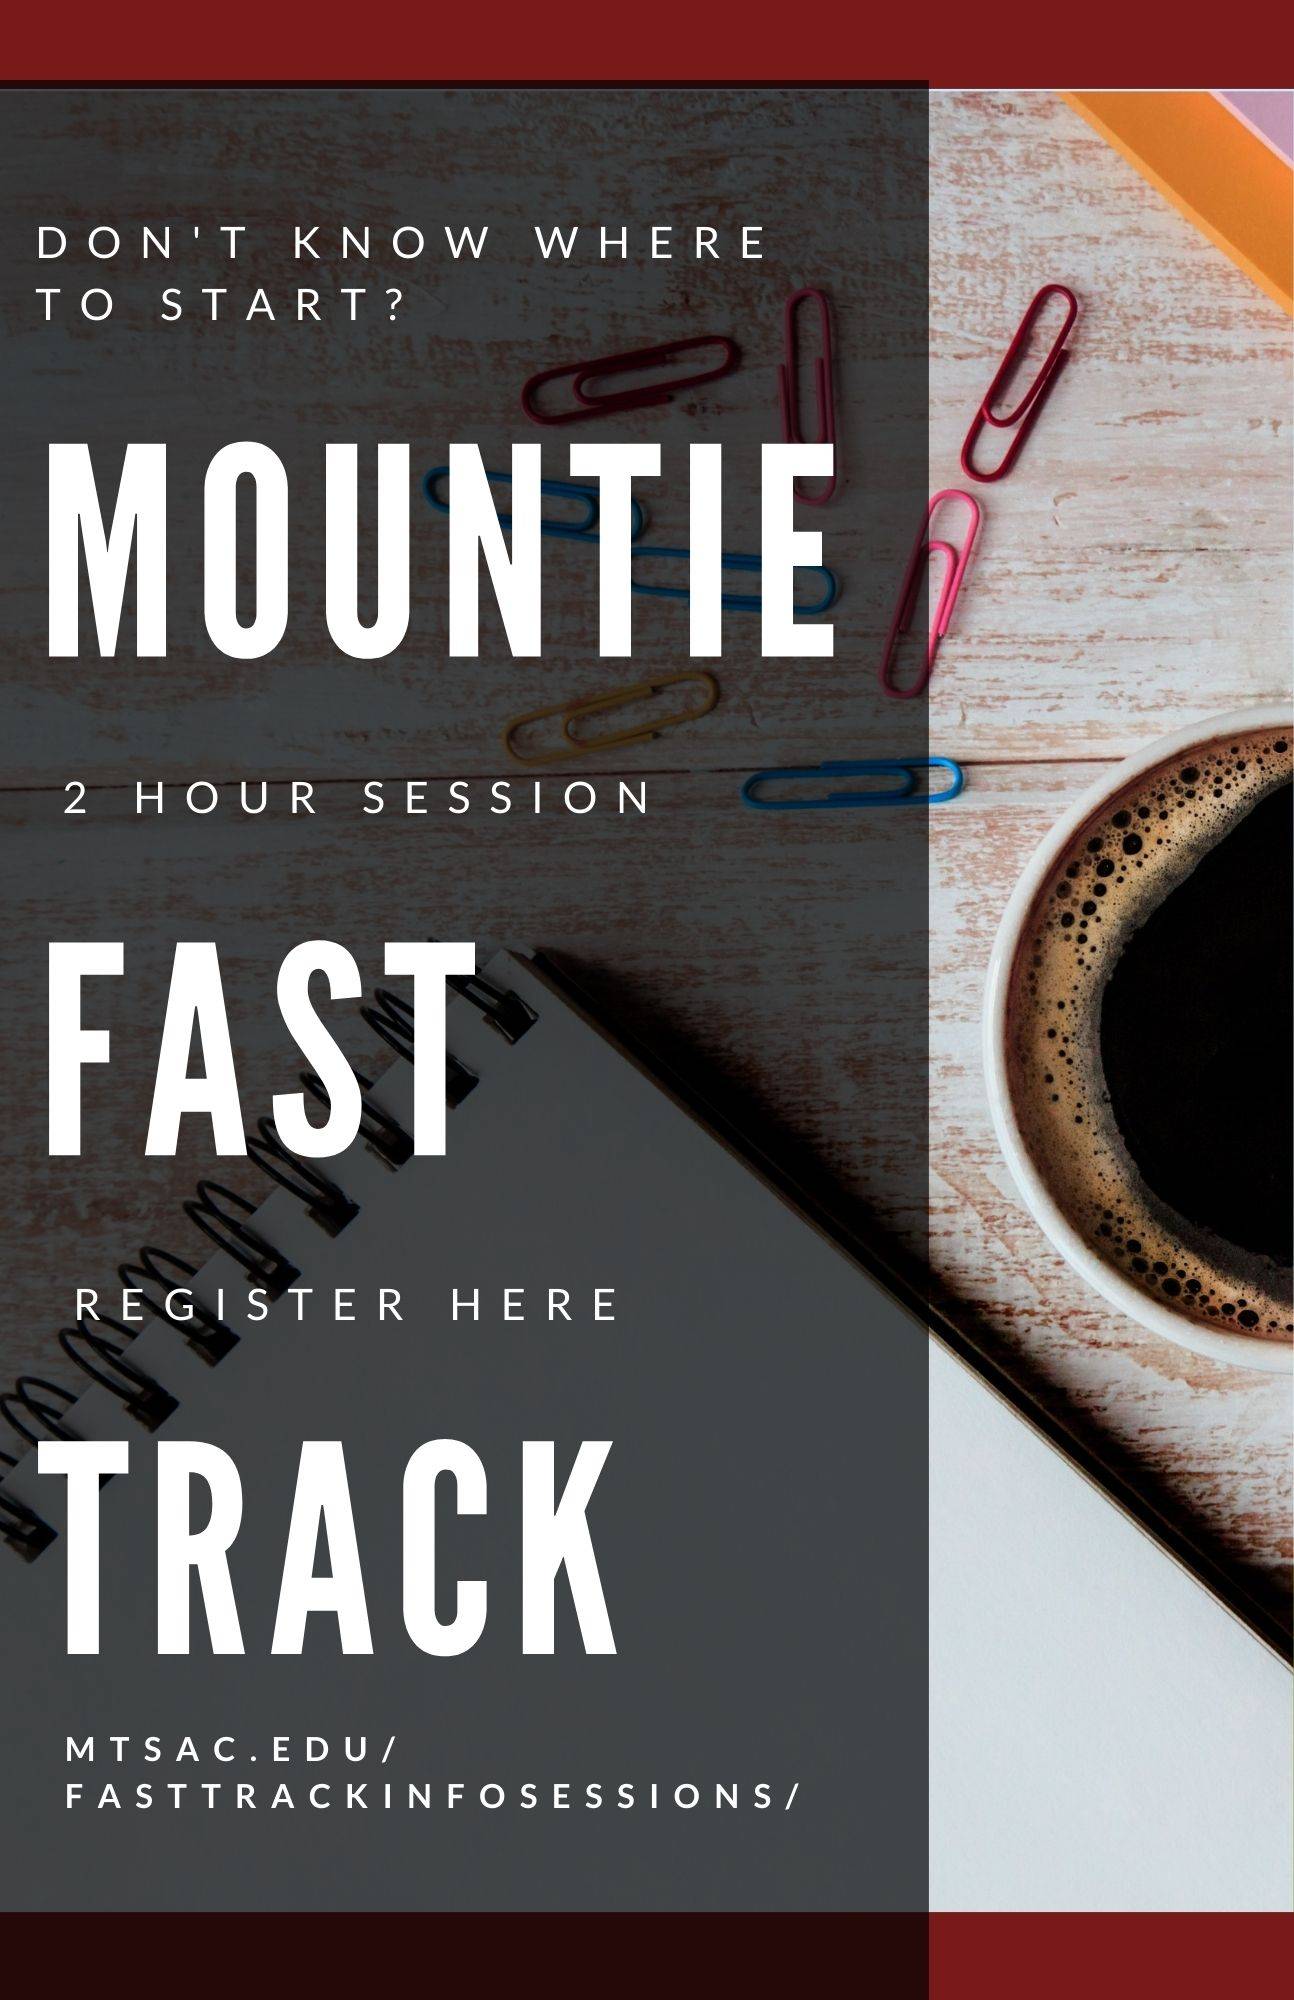 don't know where to start? register with mountie fast track